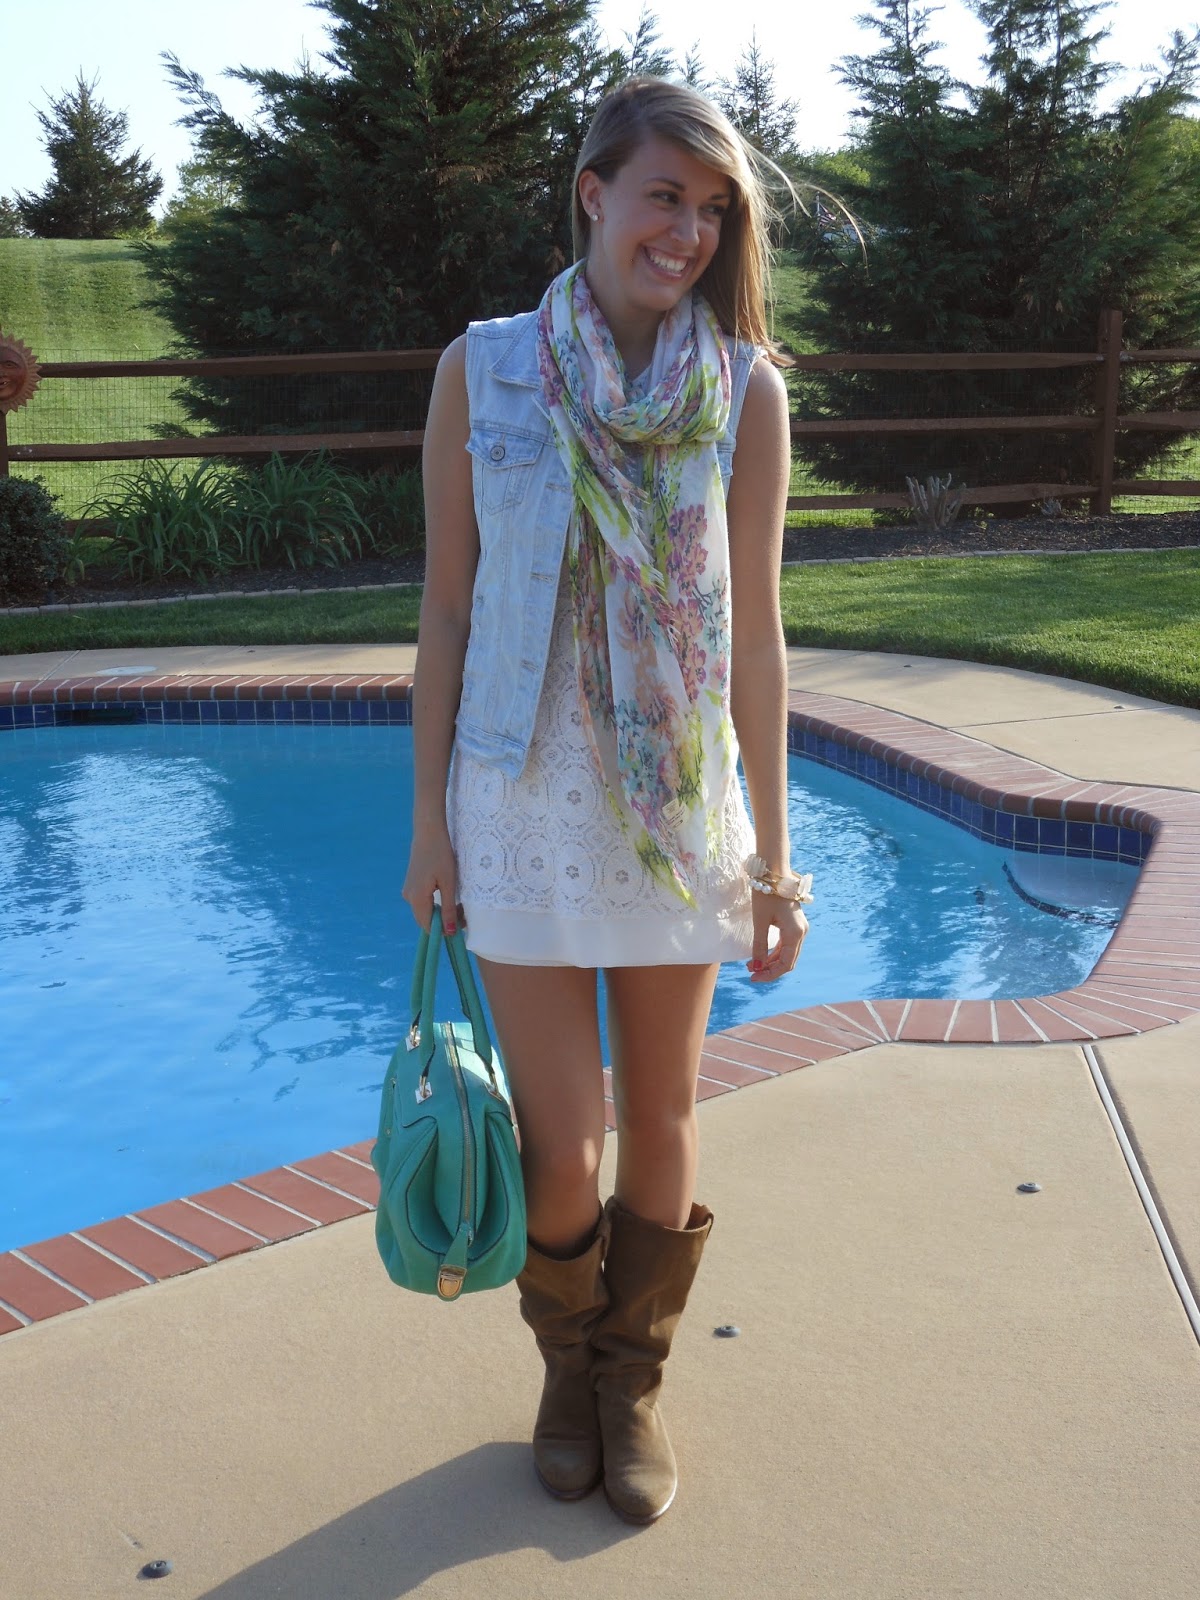 dress in sparkles: florals and warm weather